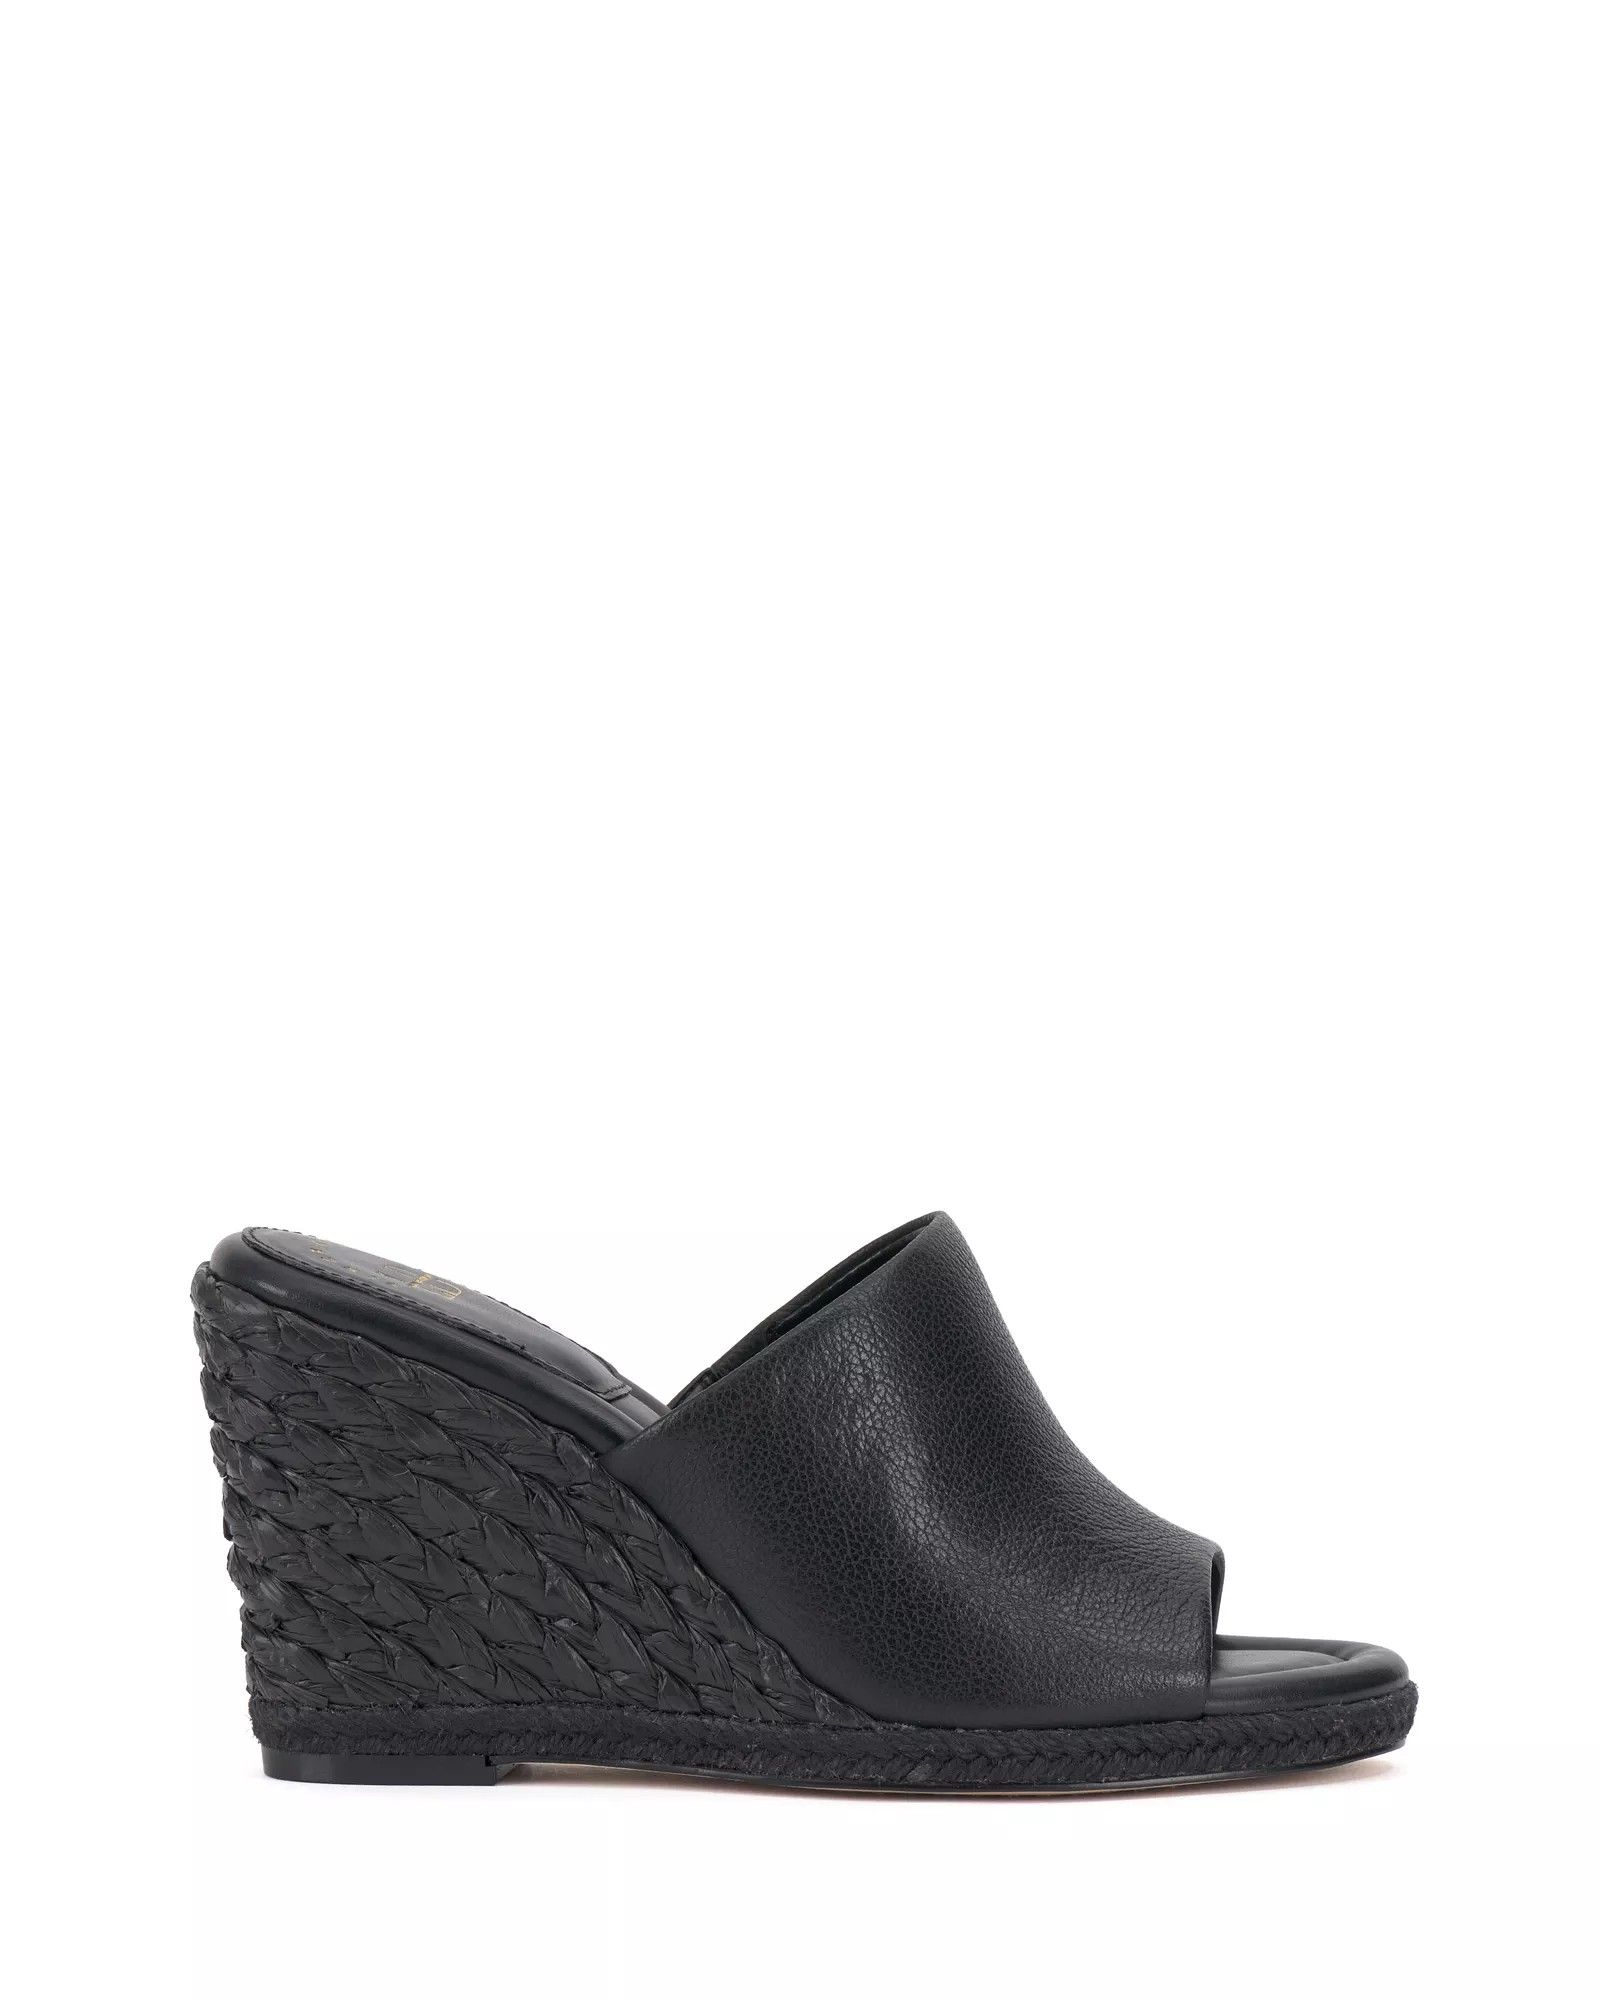 Vince Camuto x Laura Beverlin Poppy Wedge Mule | Vince Camuto